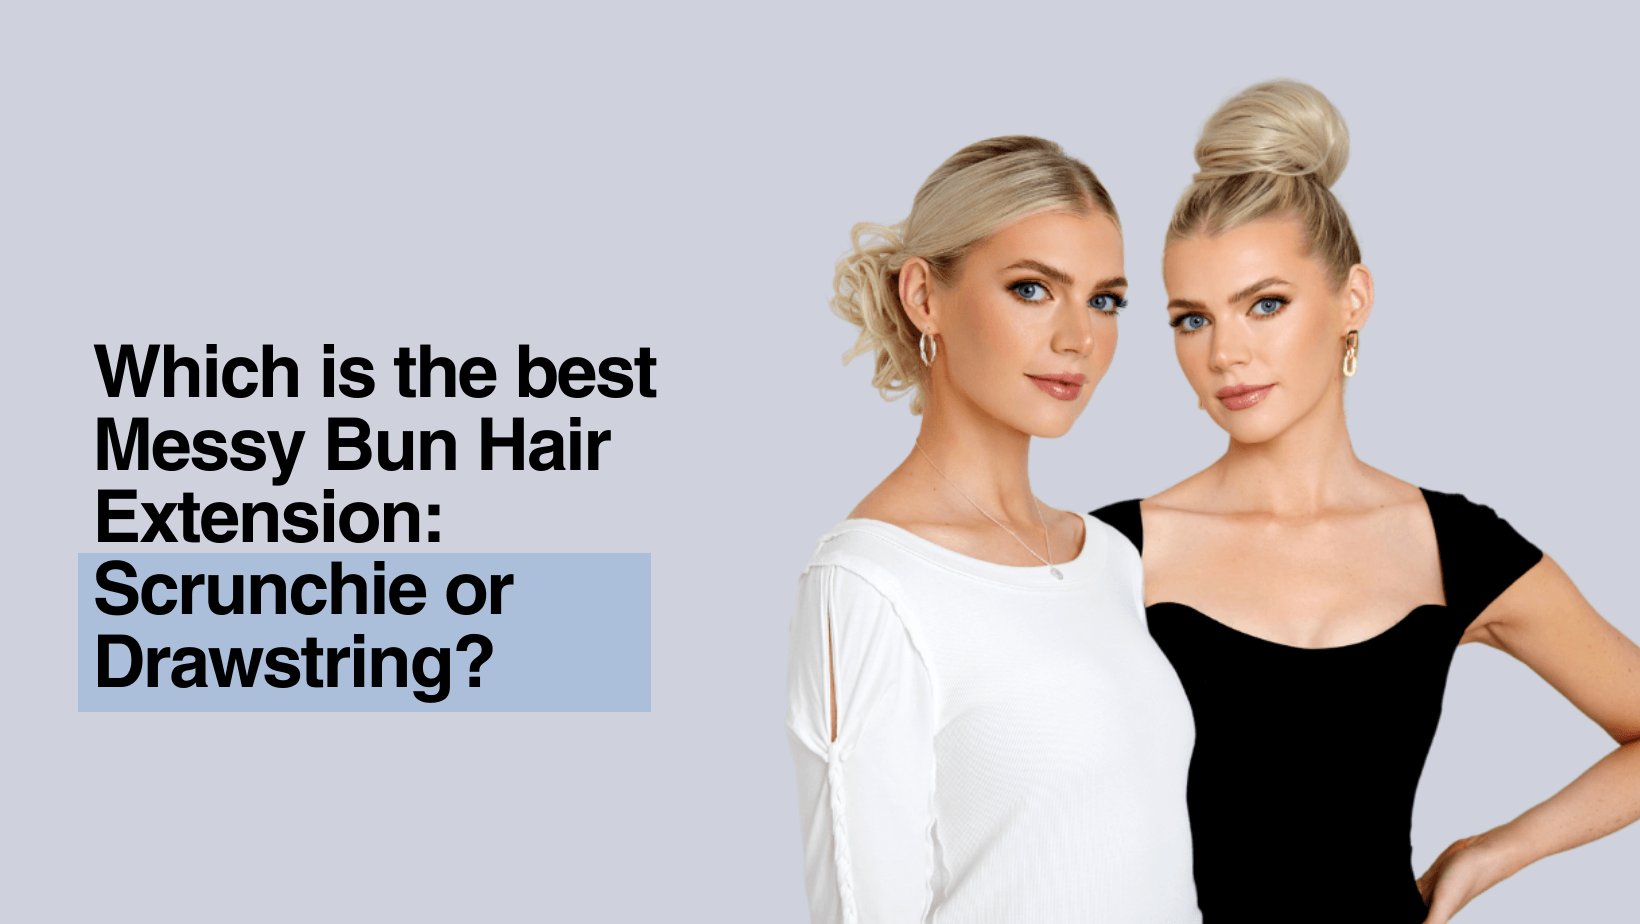 Which Is The Best Messy Bun Hair Extension: Scrunchie or Drawstring?